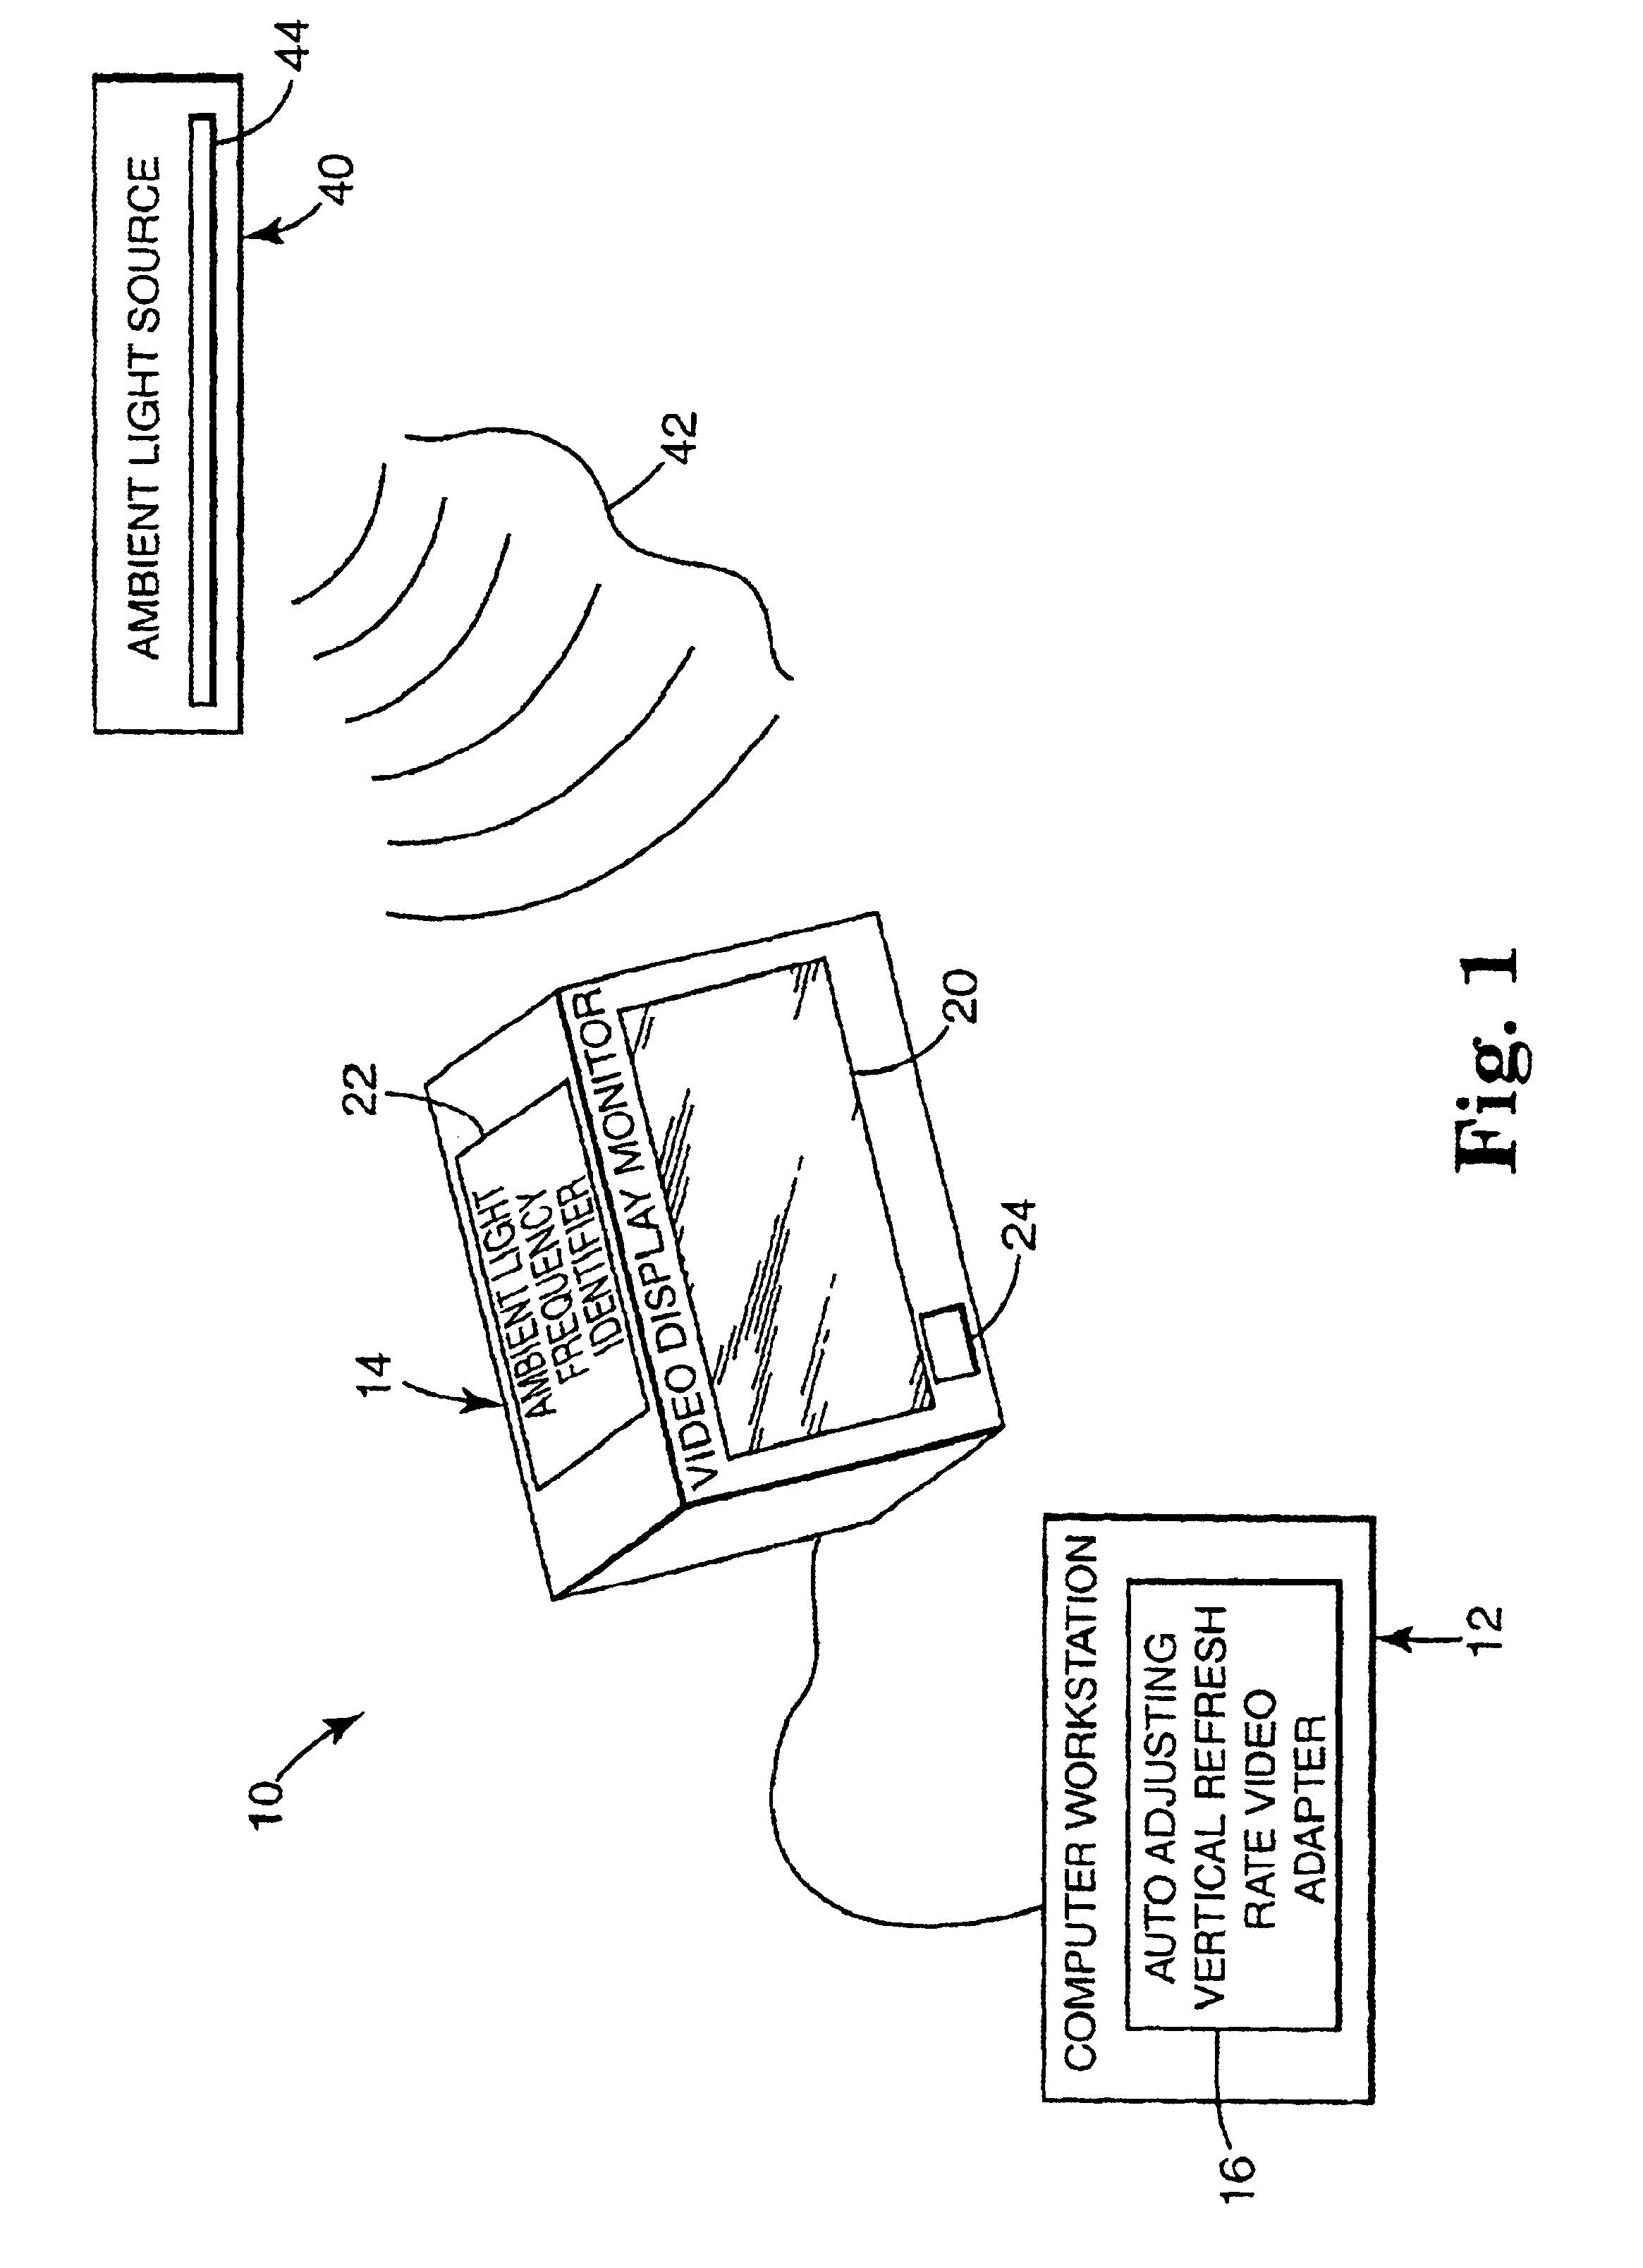 Method and system for automatically selecting a vertical refresh rate for a video display monitor